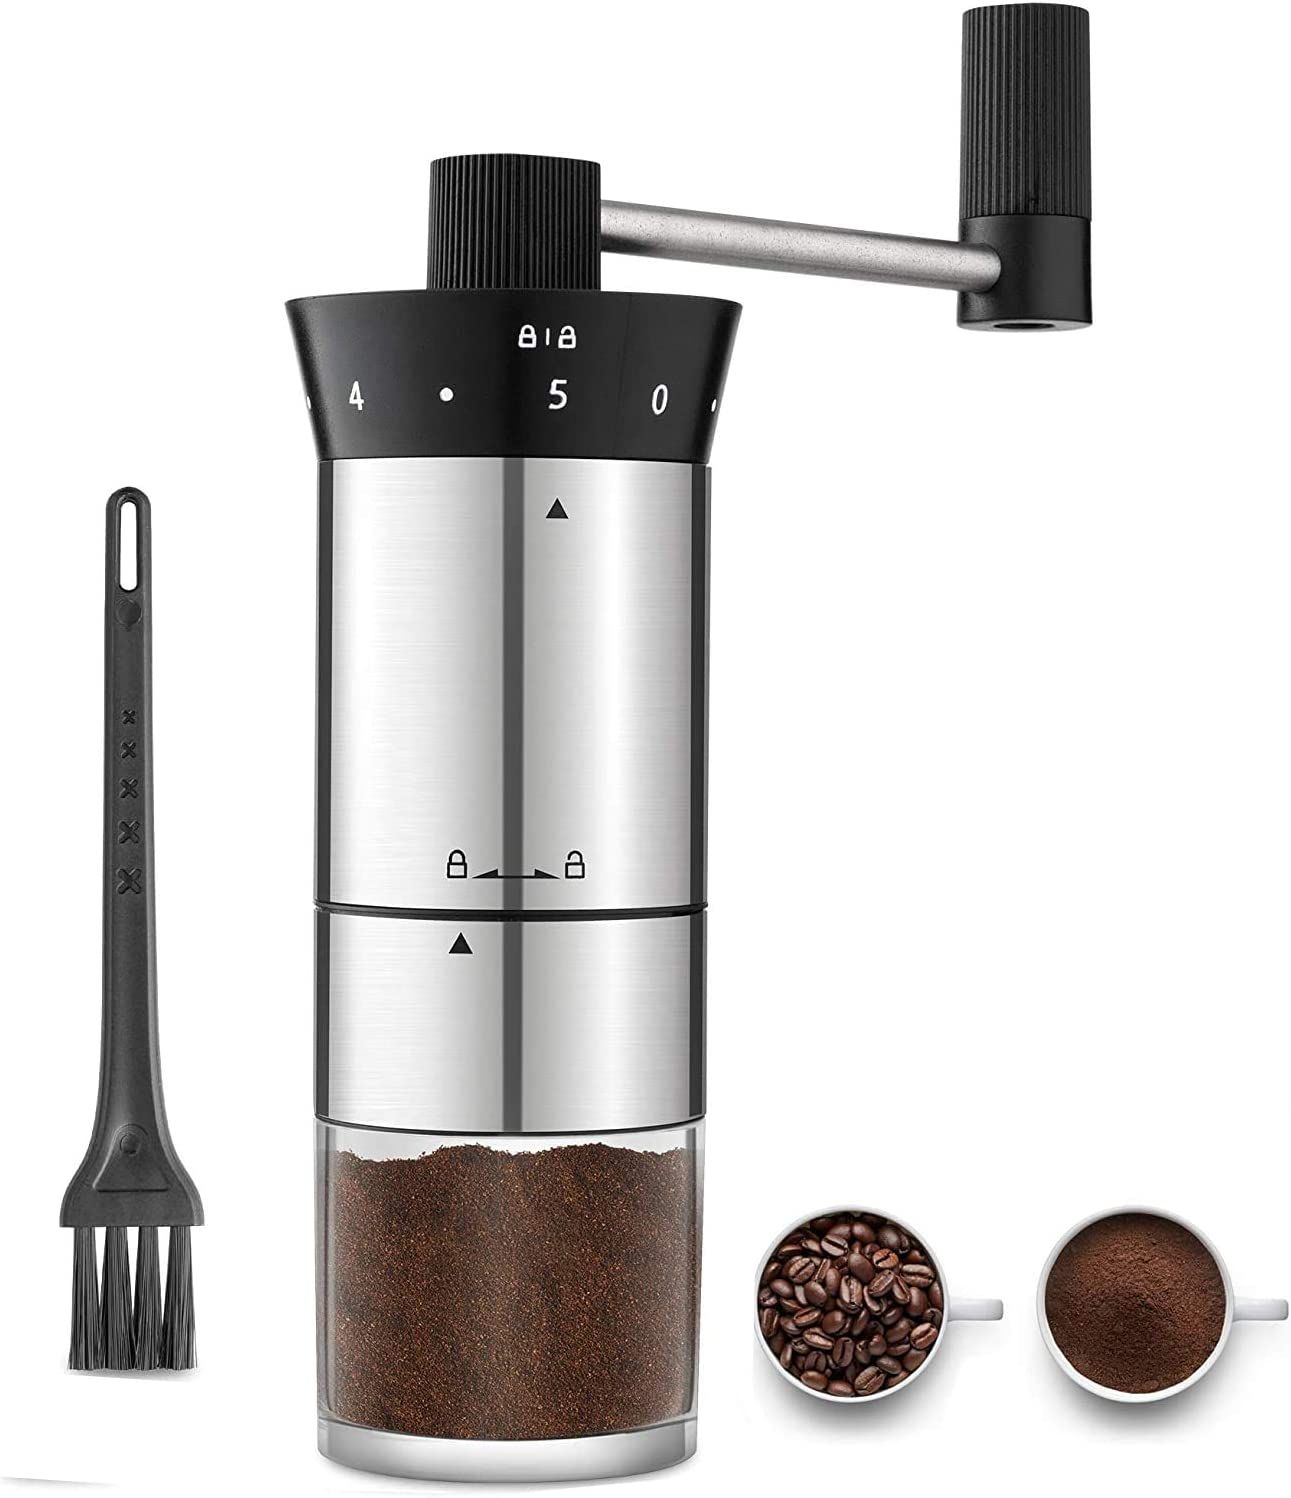 TIMCOOK Manual Coffee Grinder 5 Adjustable Grinding Levels Portable Hand Coffee Grinder Stainless Steel with Ceramic Grinder and Brush